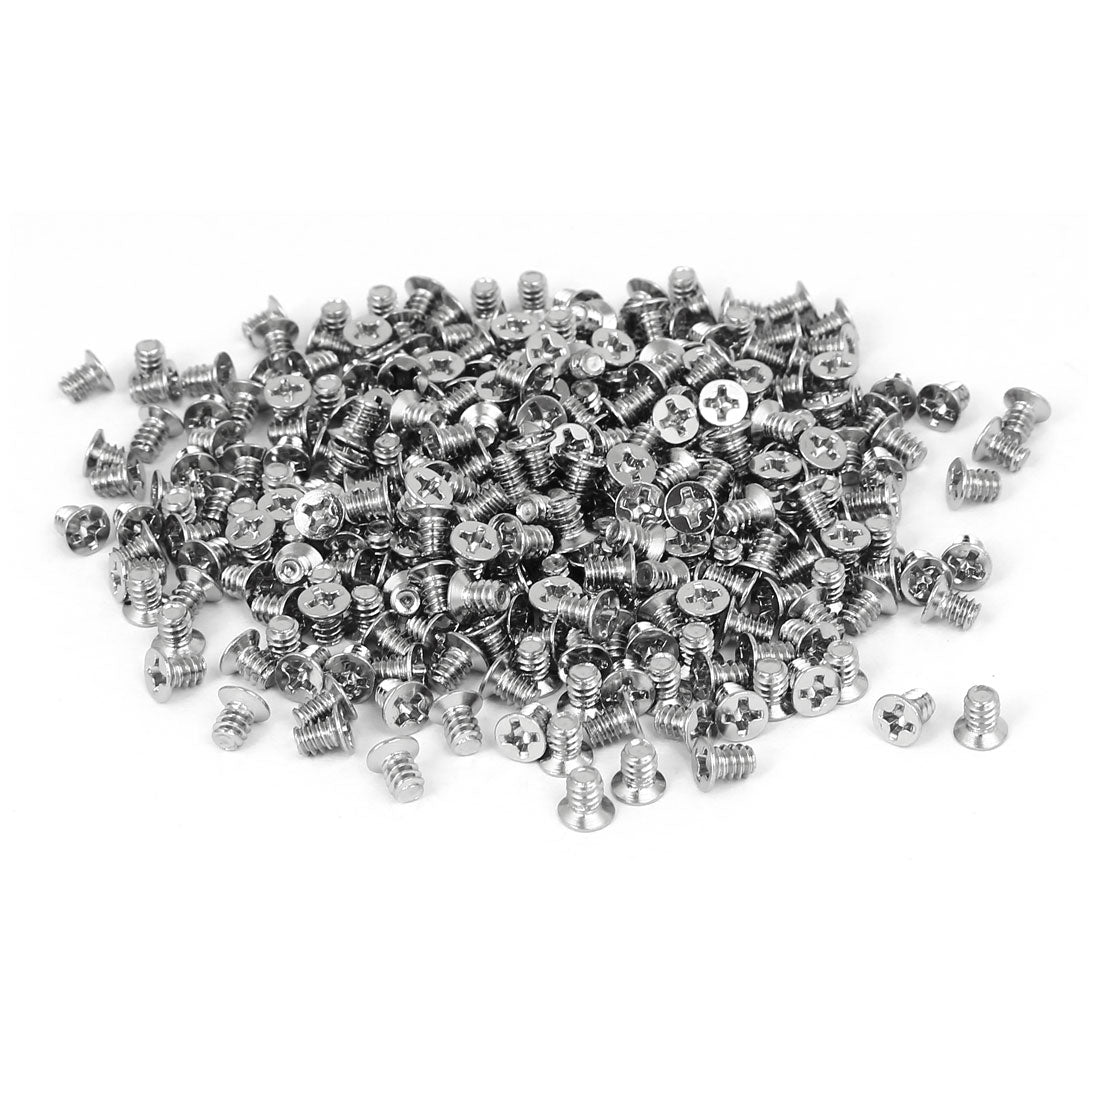 uxcell Uxcell Computer PC Case Flat Phillips Head Hard Drive Screw 6#-32 300pcs